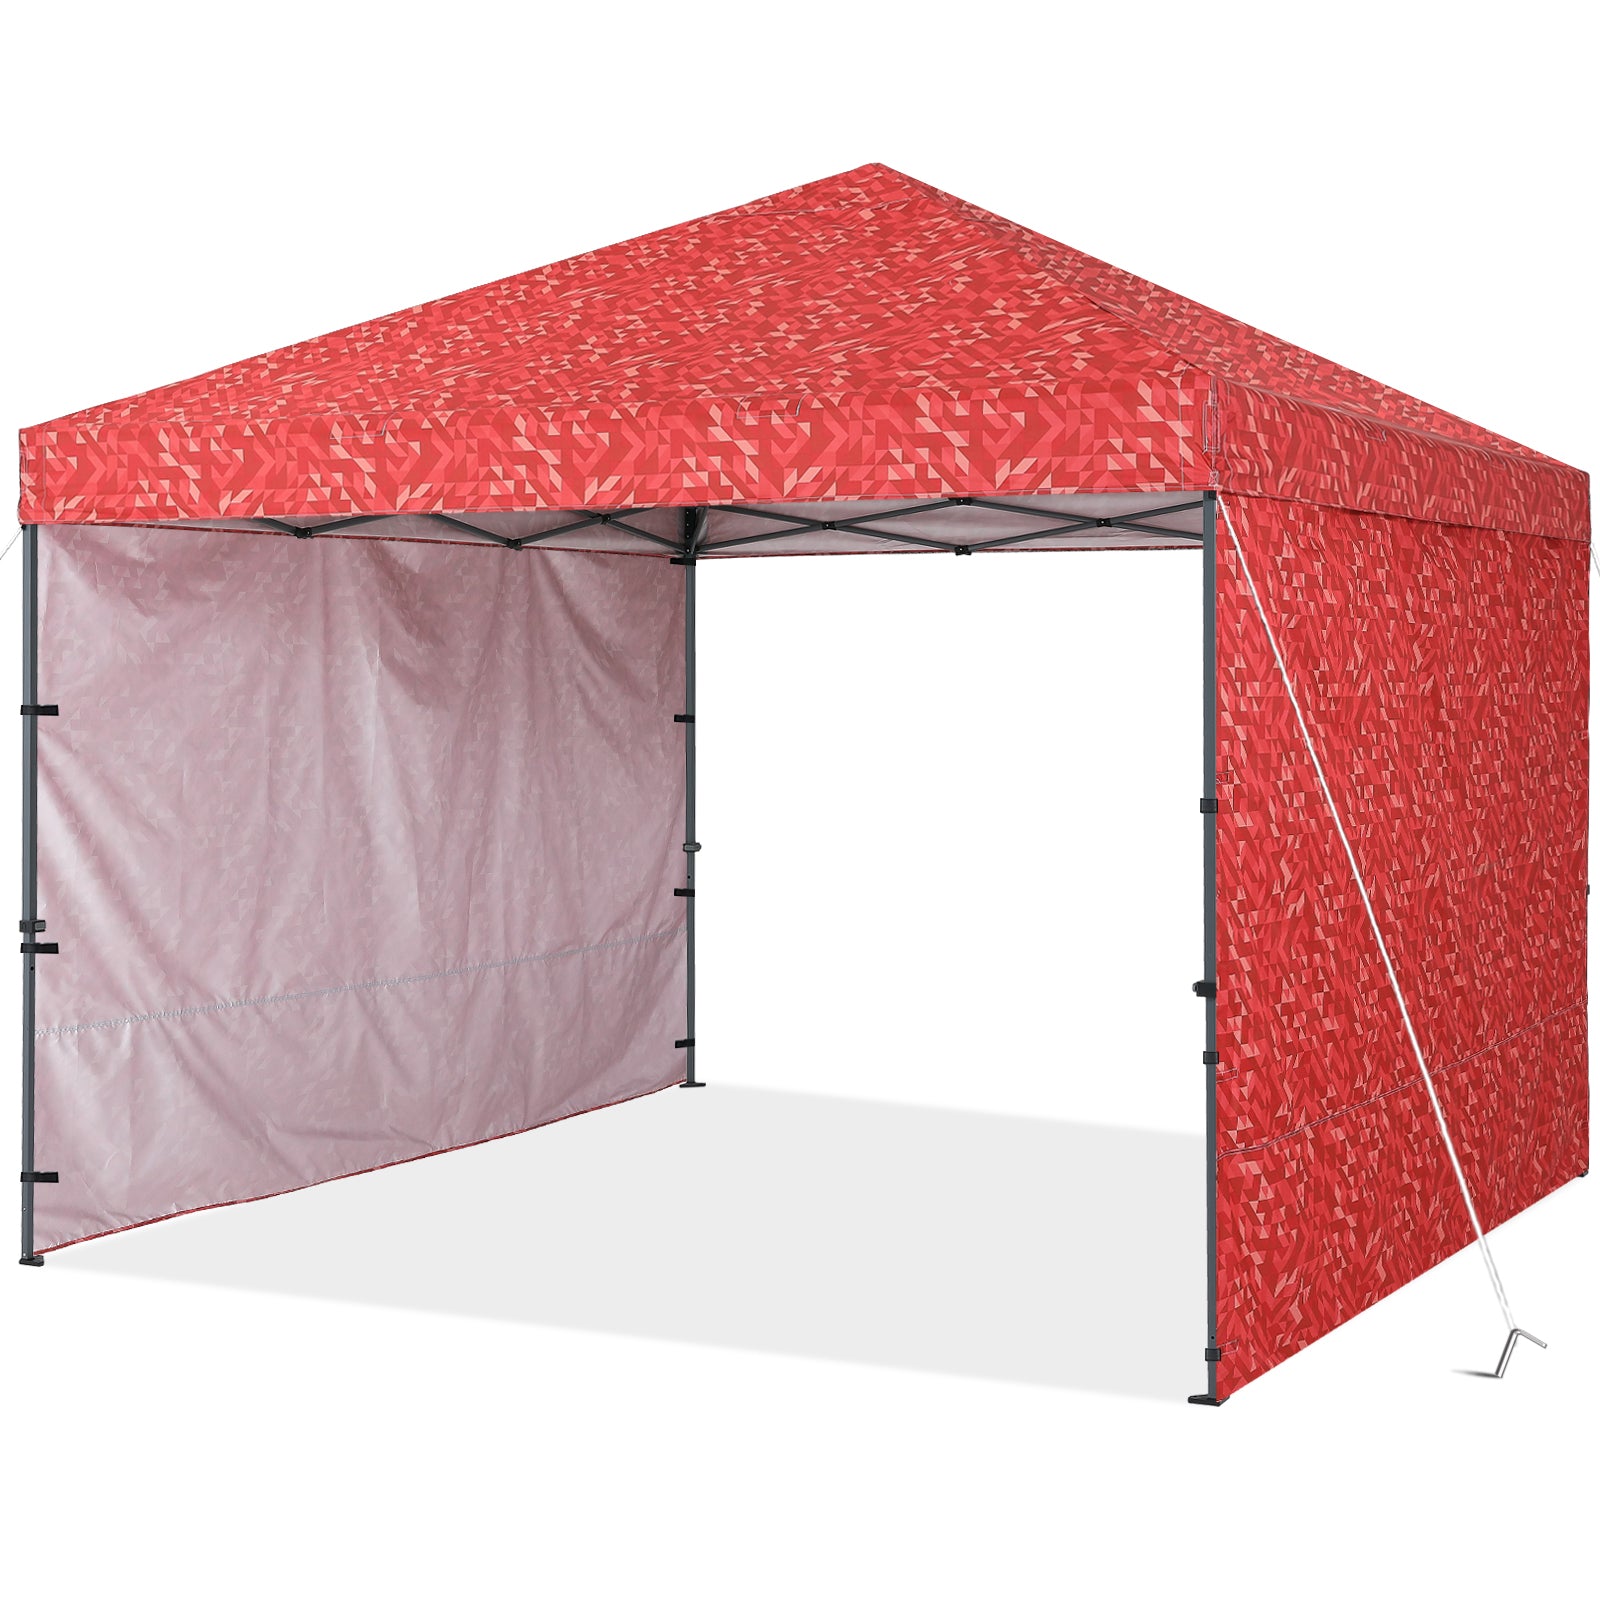 10x10FT Outdoor Easy Pop up Canopy Tent With Graphic Print(2 Sun Walls)